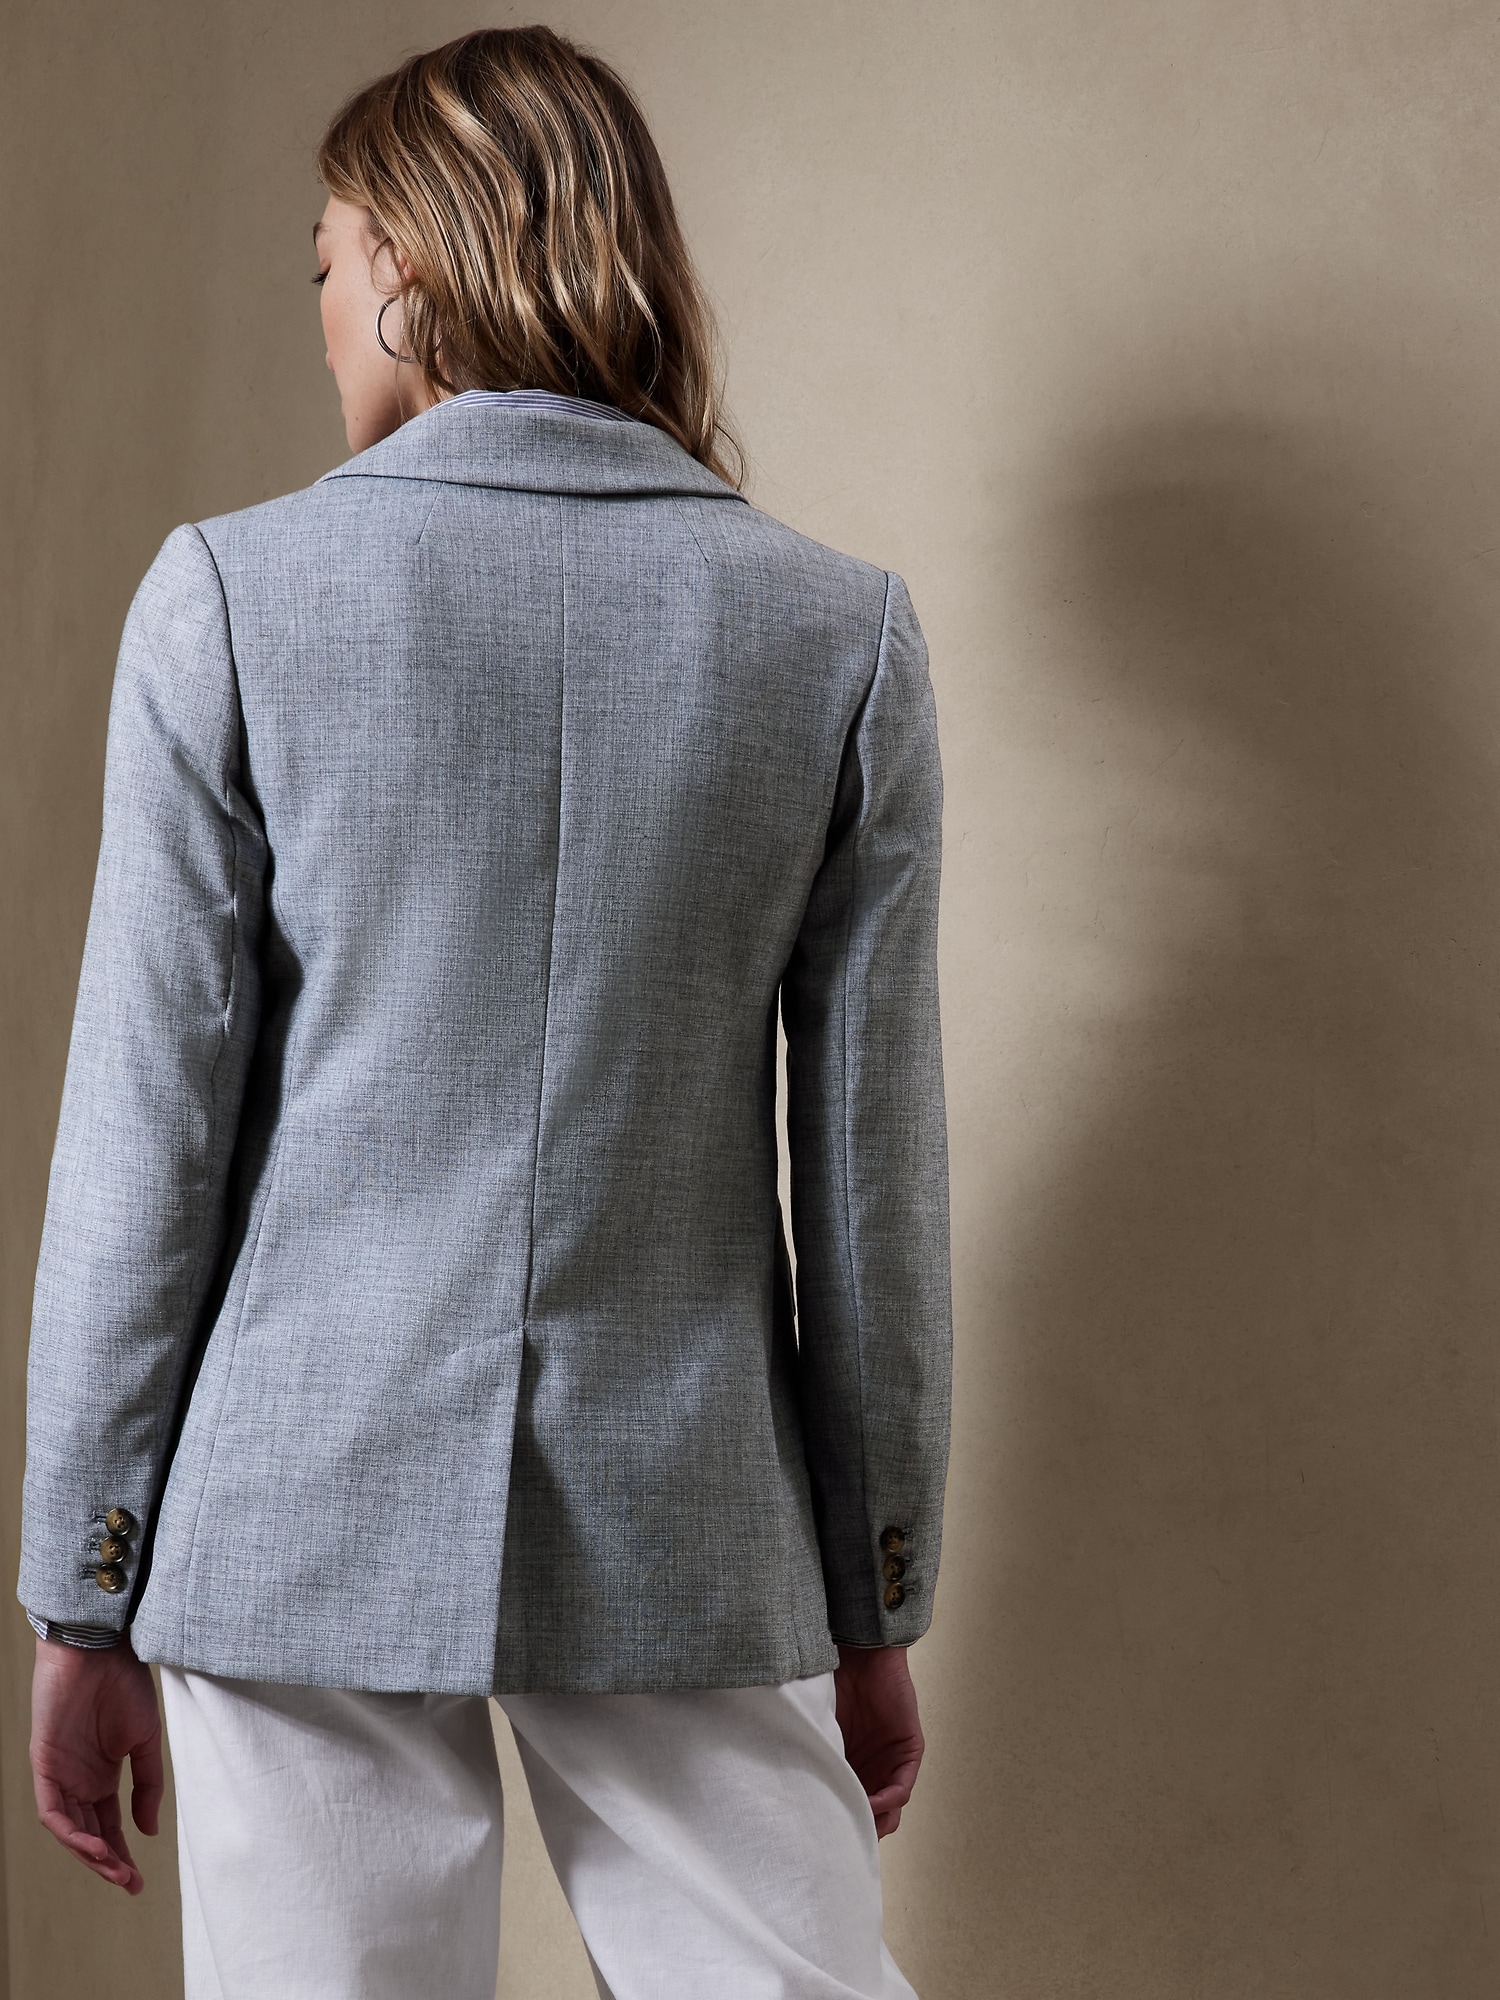 Long and Lean Chambray Suit Blazer